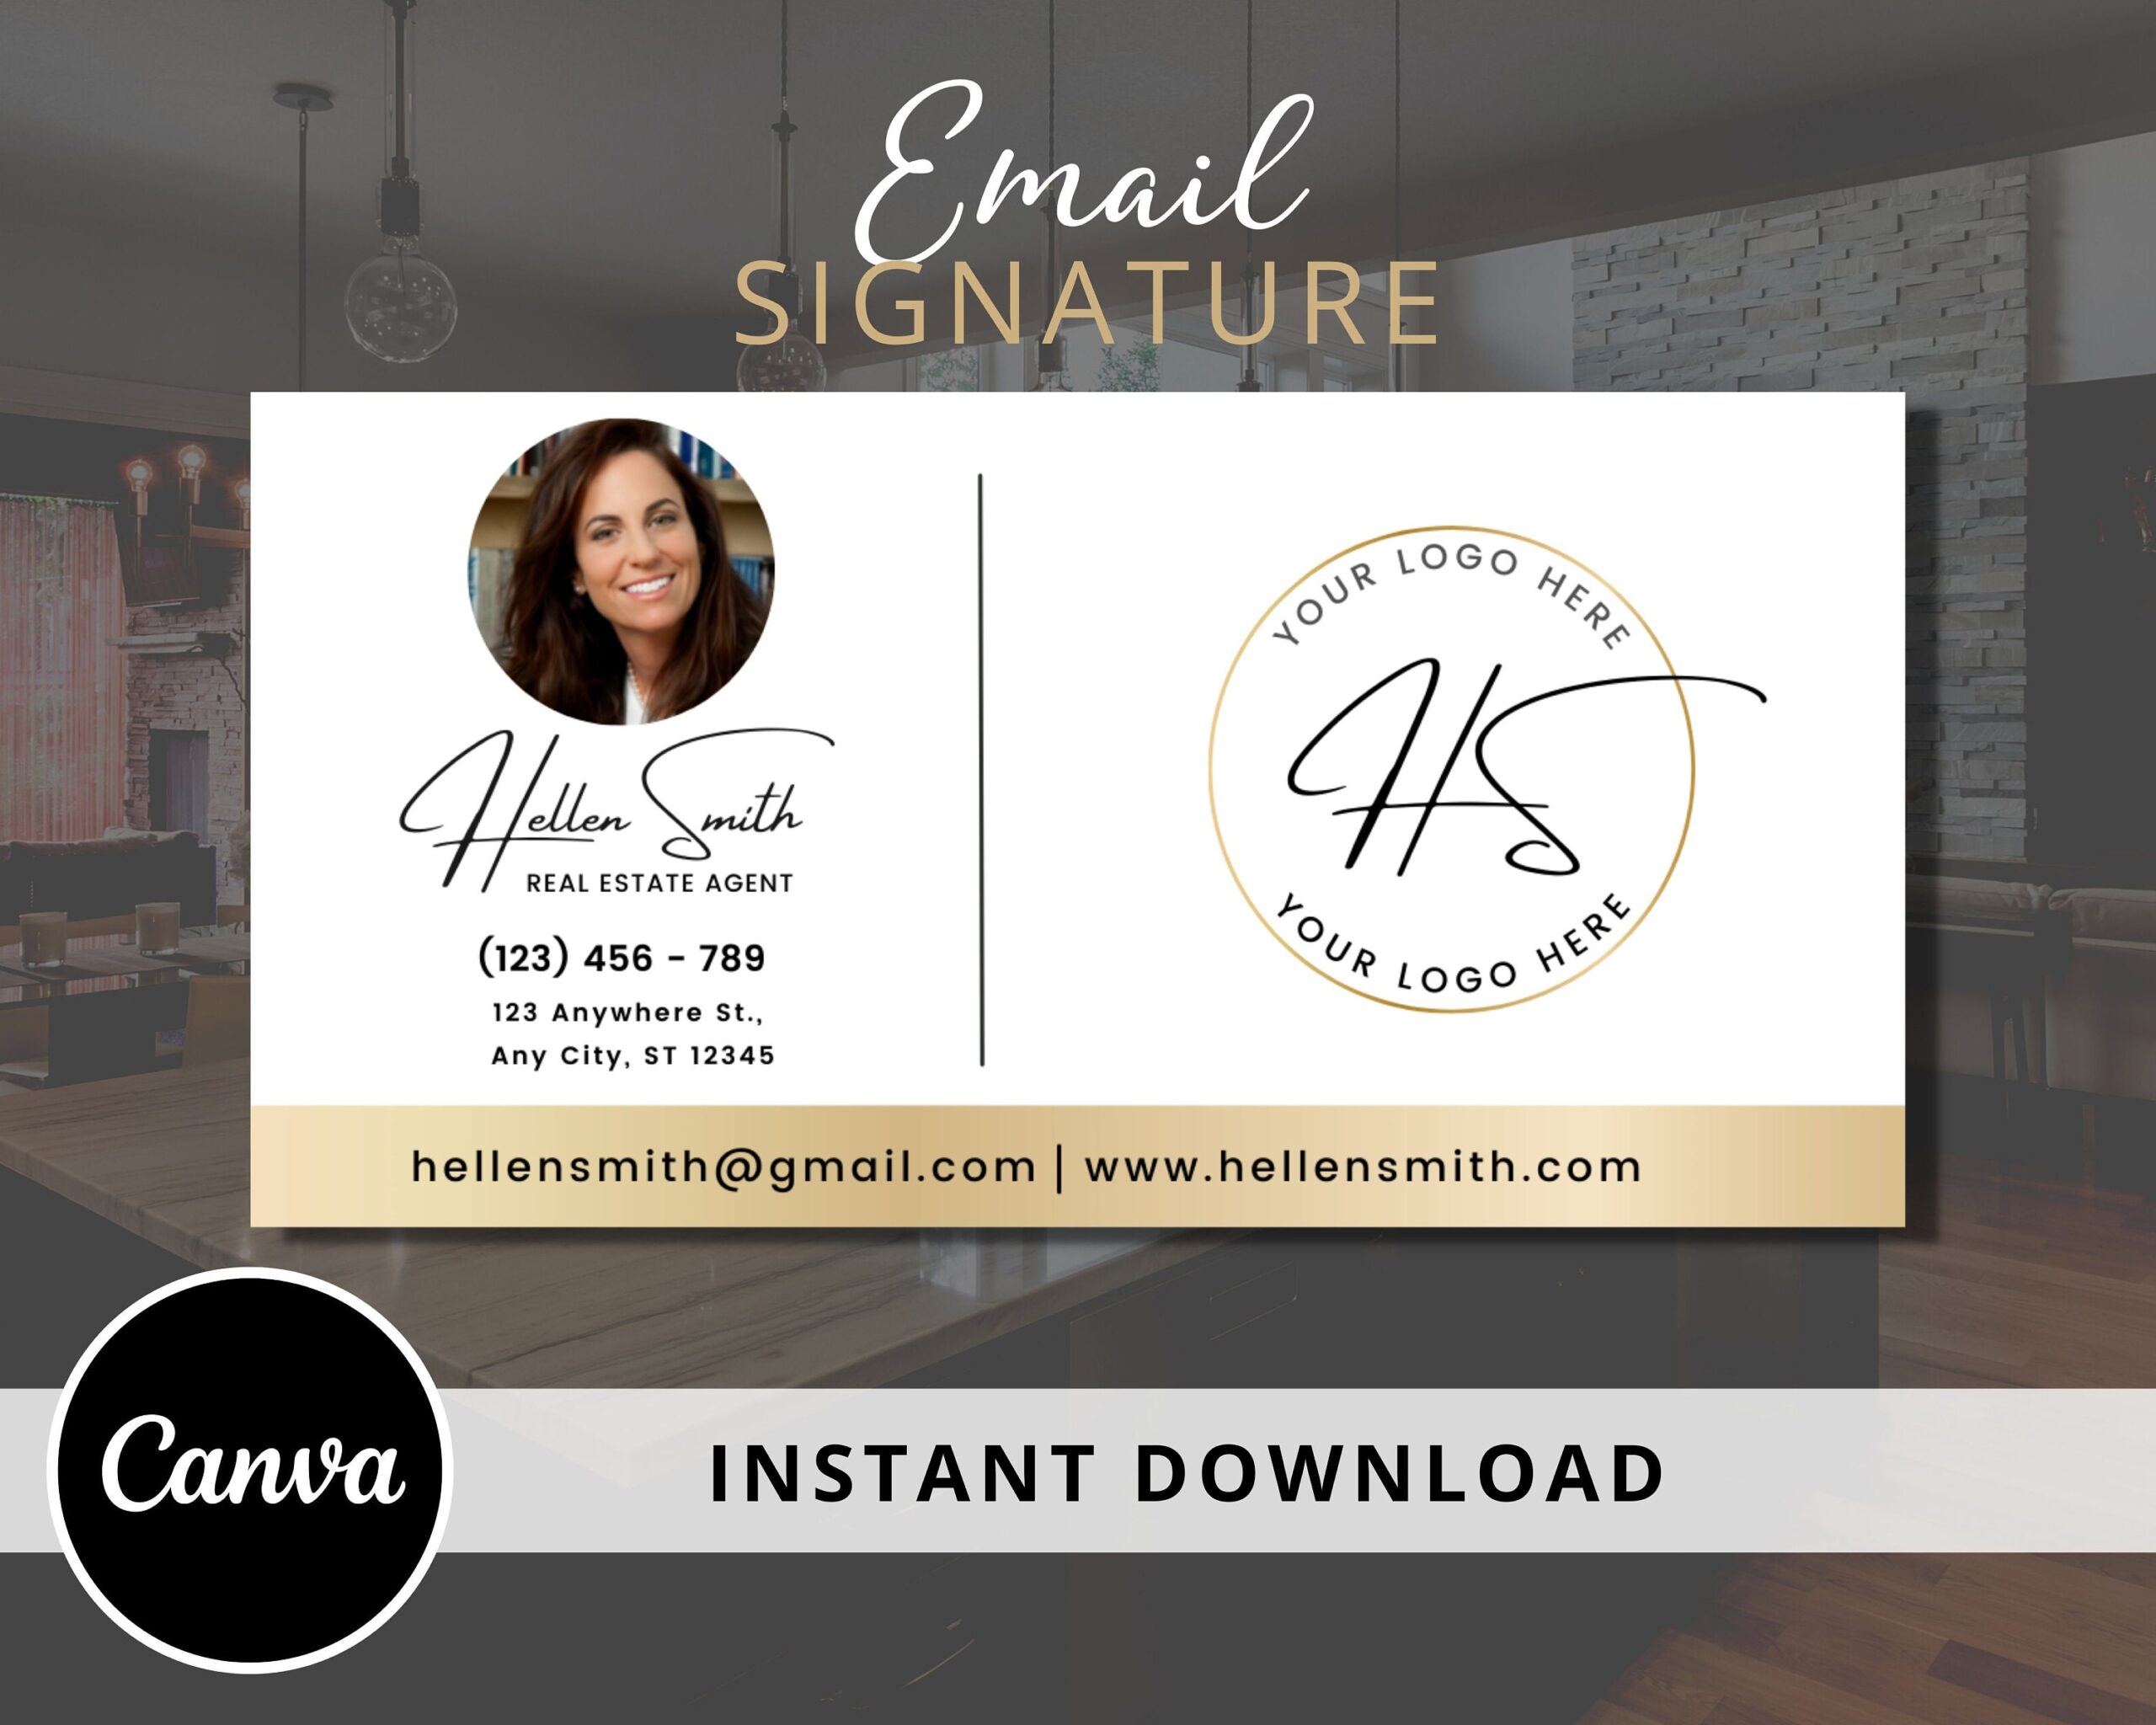 Email Signature Editable Canva Template -  Gmail Design Footer -  Branding Photographer Template Design - Instant Download - Picture Signature